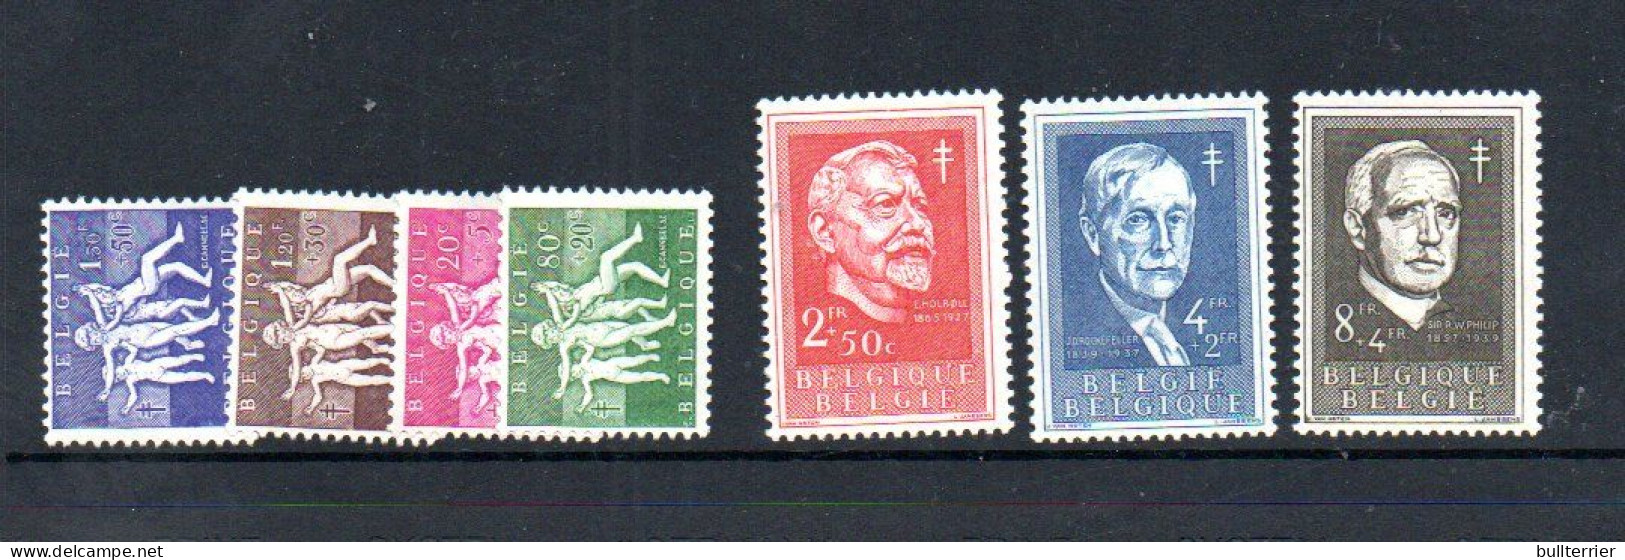 BELGIUM - 1955  - ANTB FUNDS SET OF 7  MINT NEVER HINGED , SG CAT £90+ - Neufs